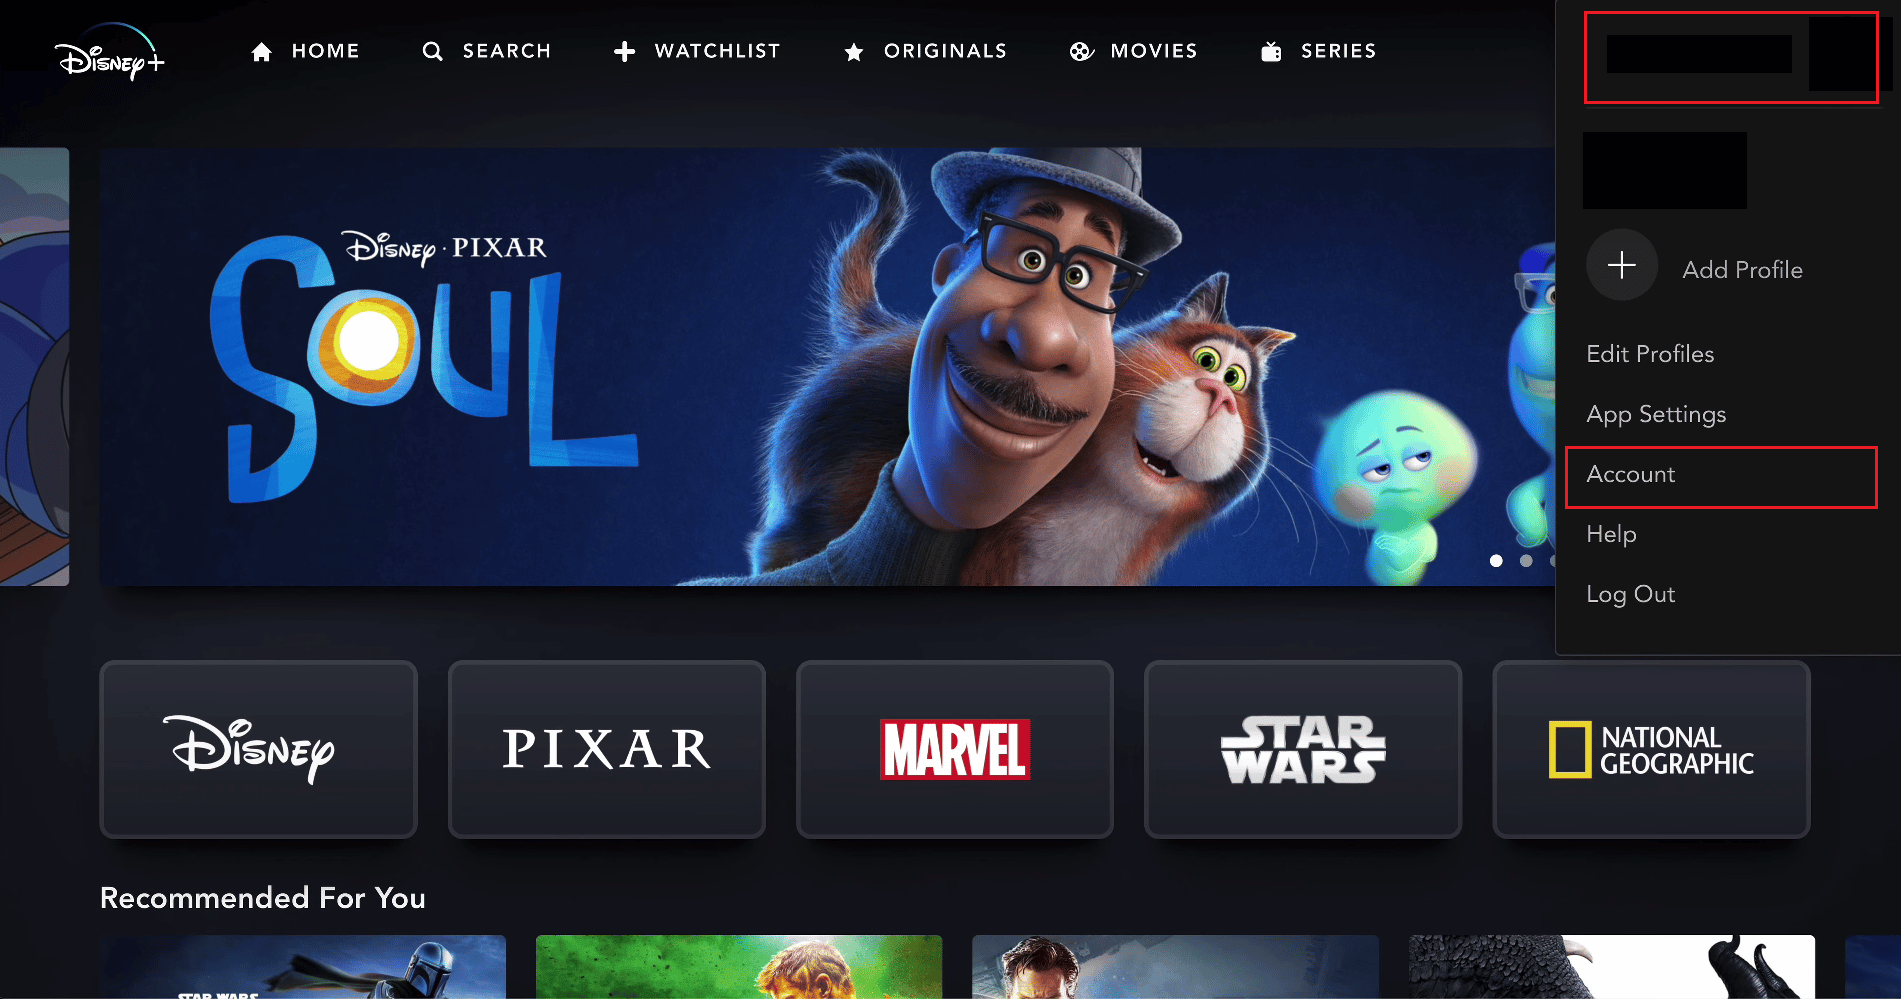 click on the profile icon - Account | How to Update Disney Plus Account